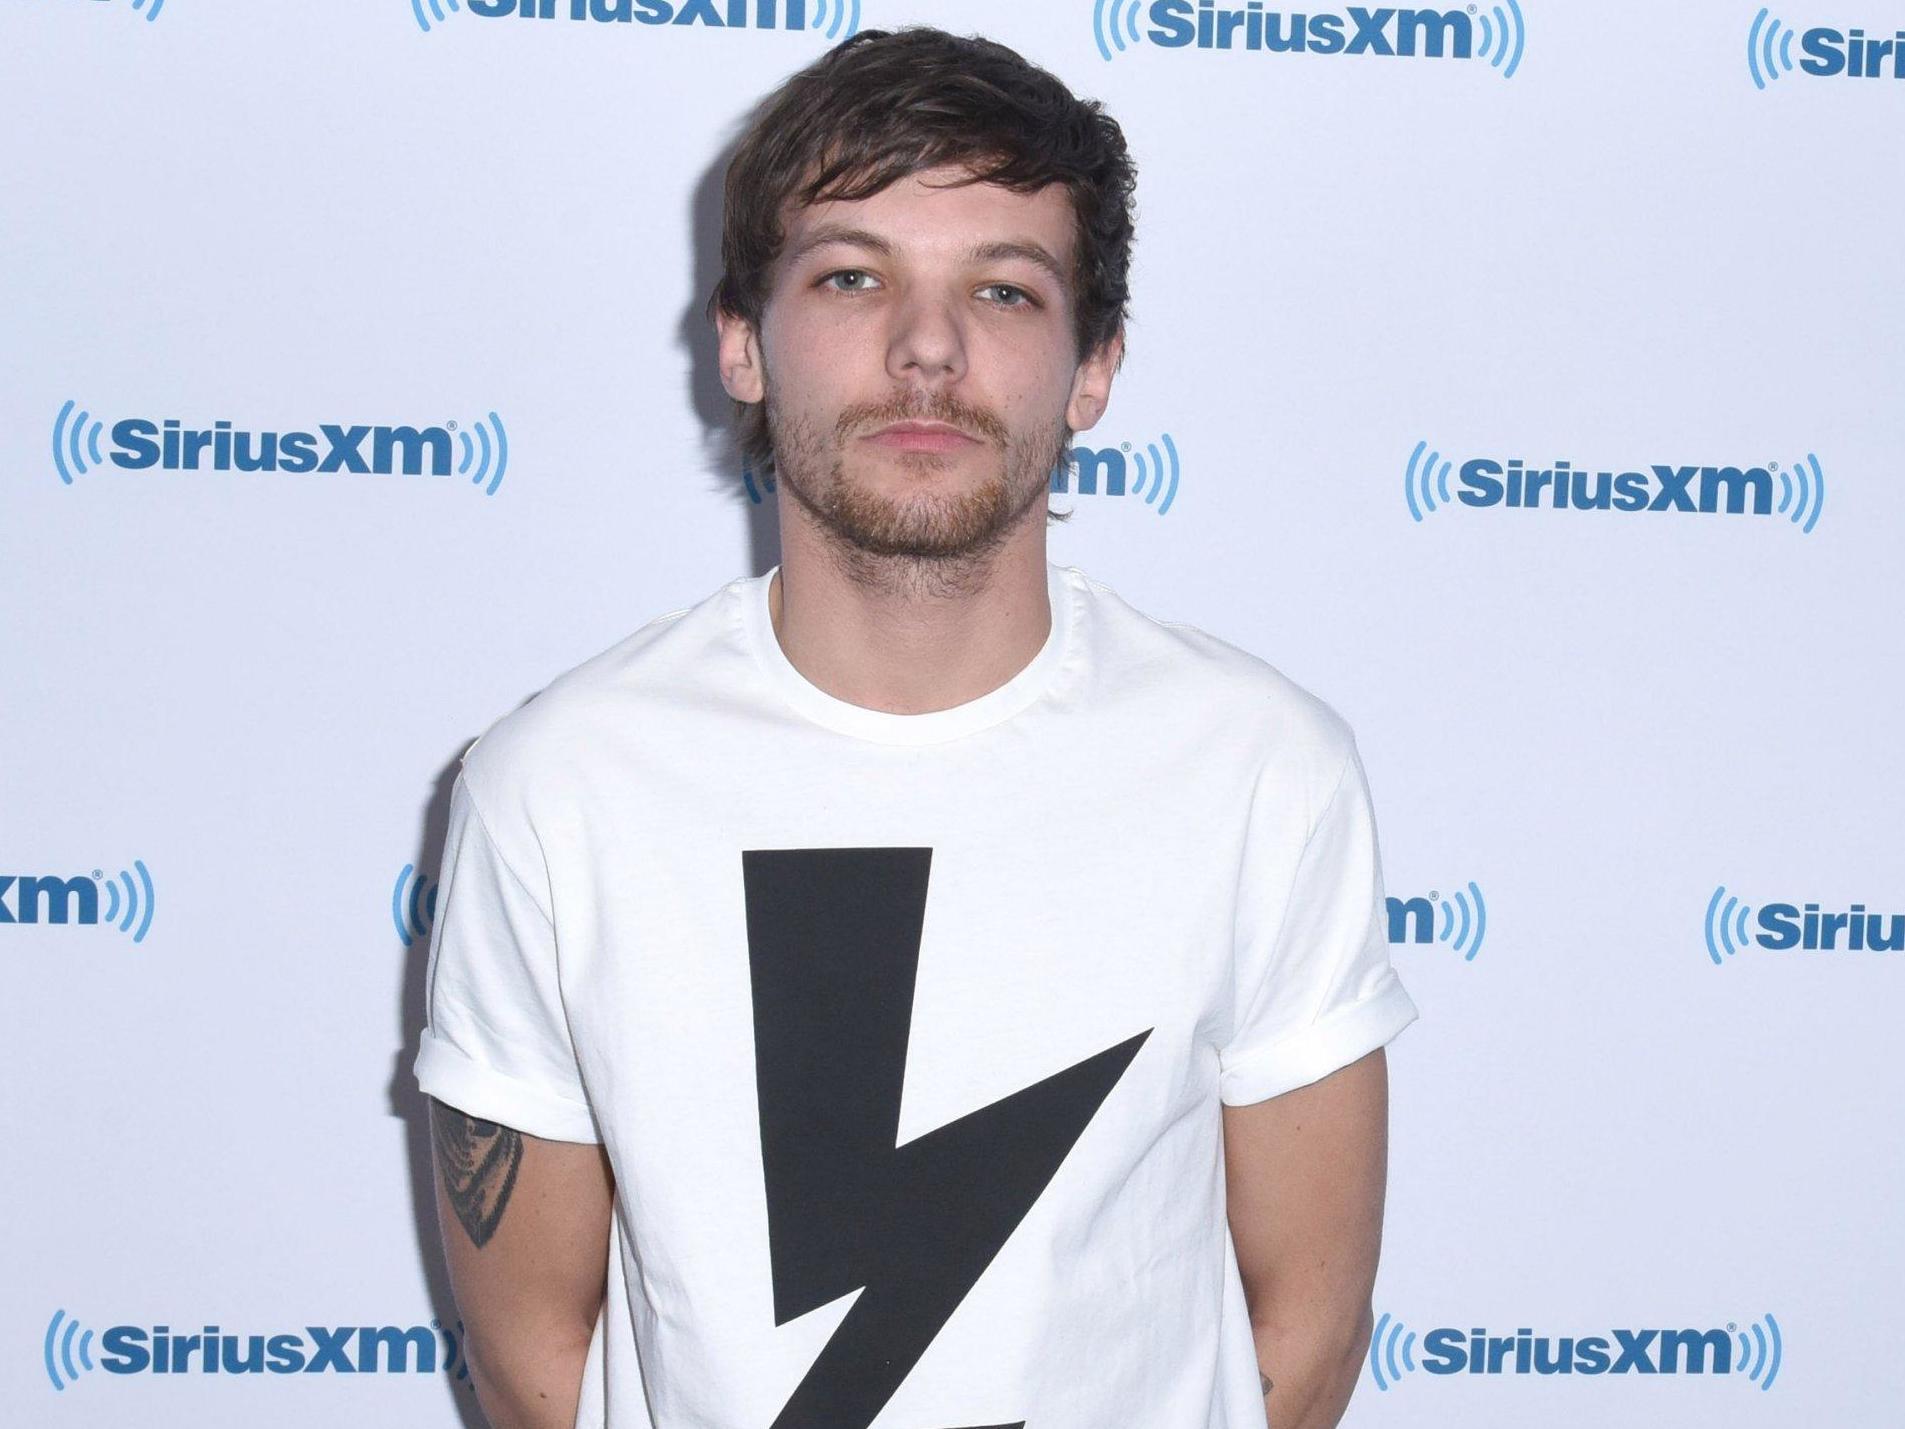 Louis Tomlinson reveals playing song Two Of Us about mother